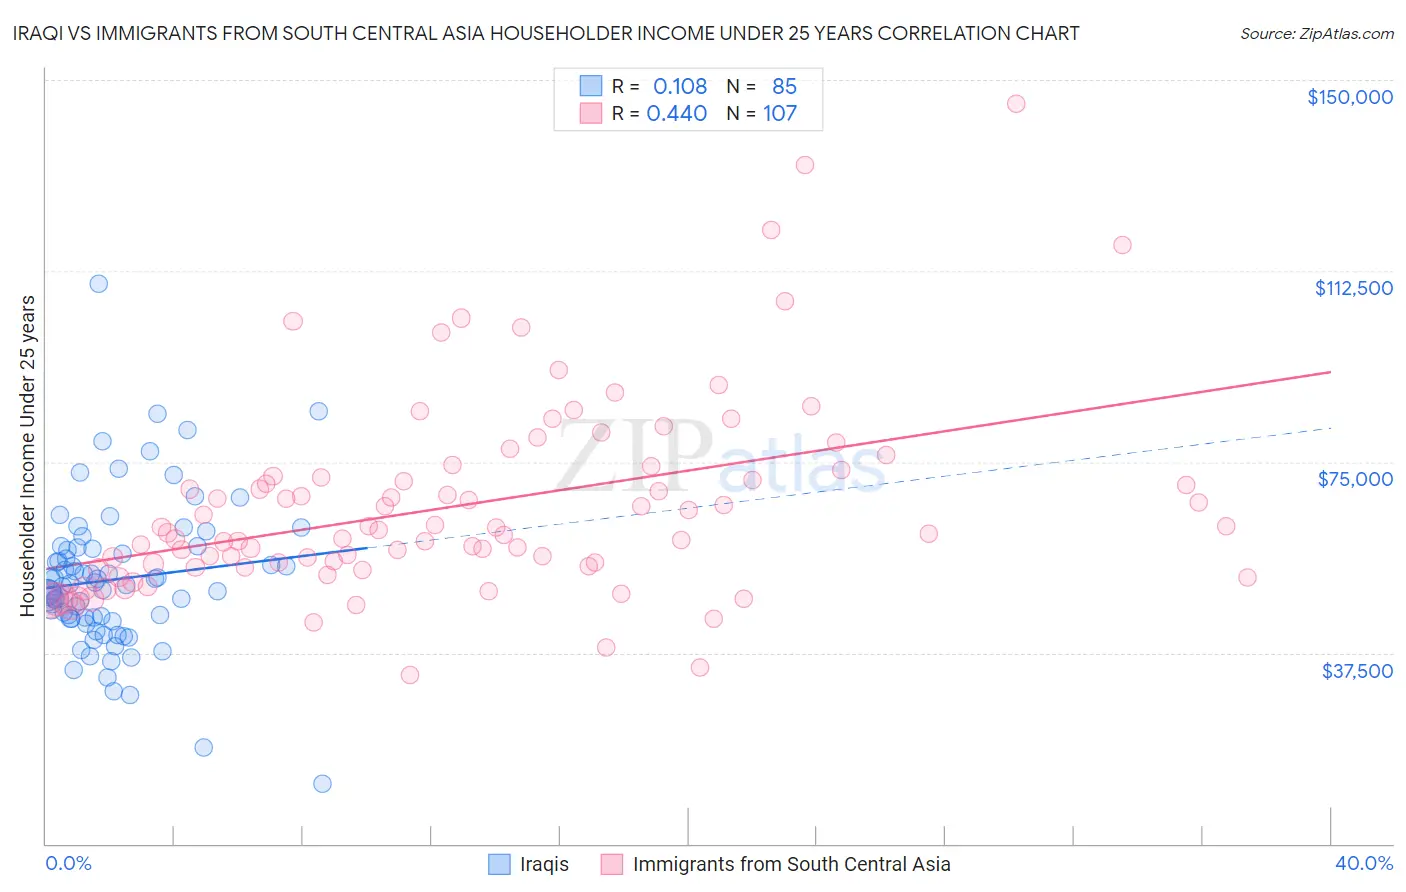 Iraqi vs Immigrants from South Central Asia Householder Income Under 25 years